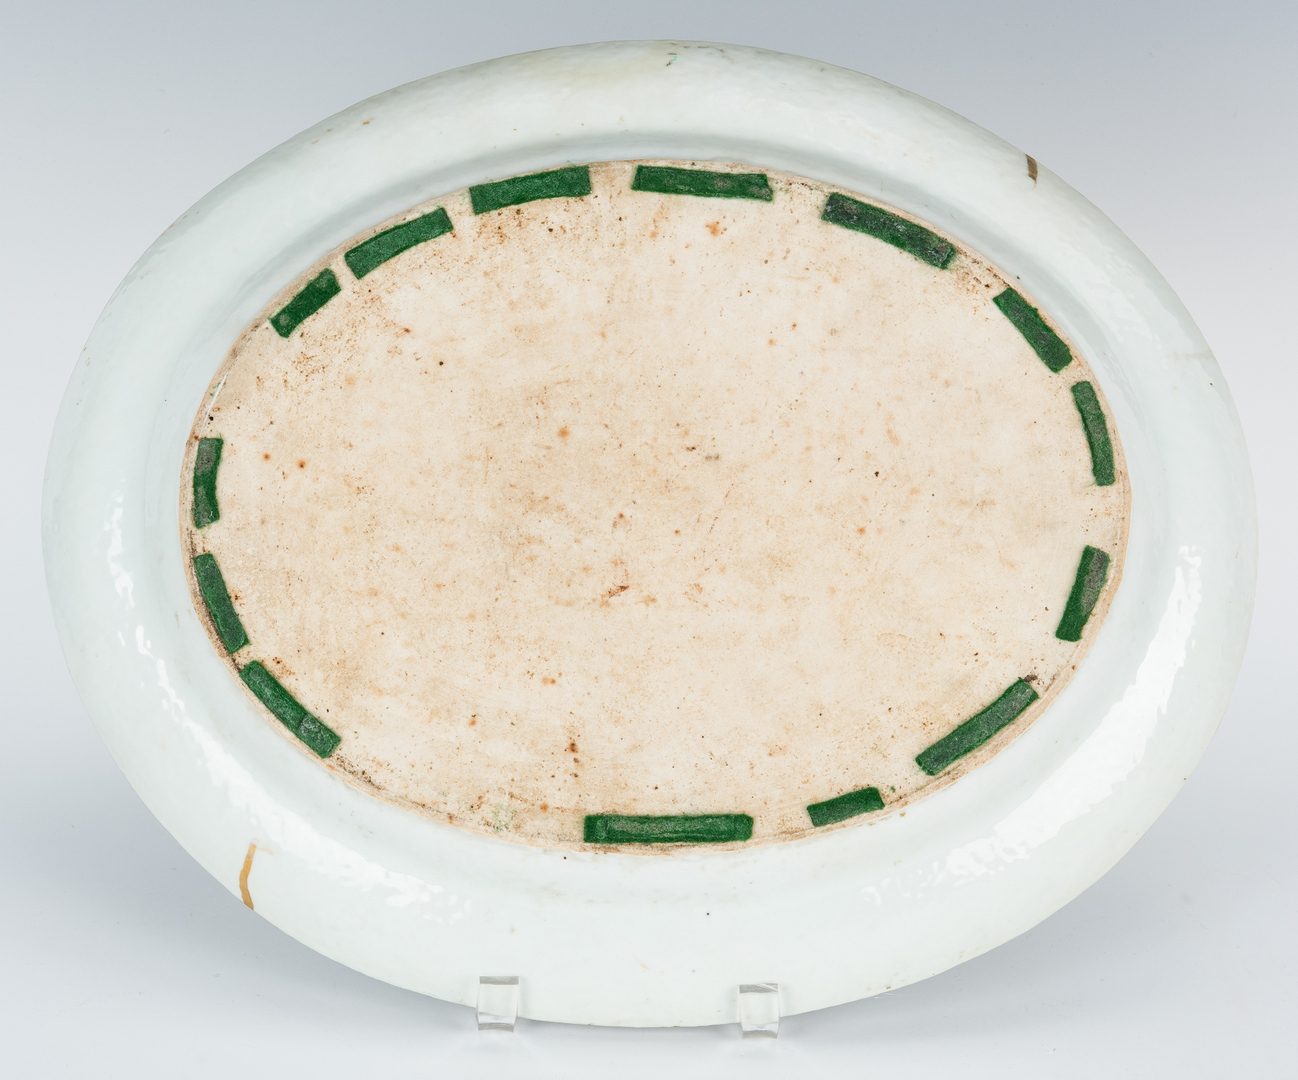 Lot 251: Rose Medallion Platter and Compote